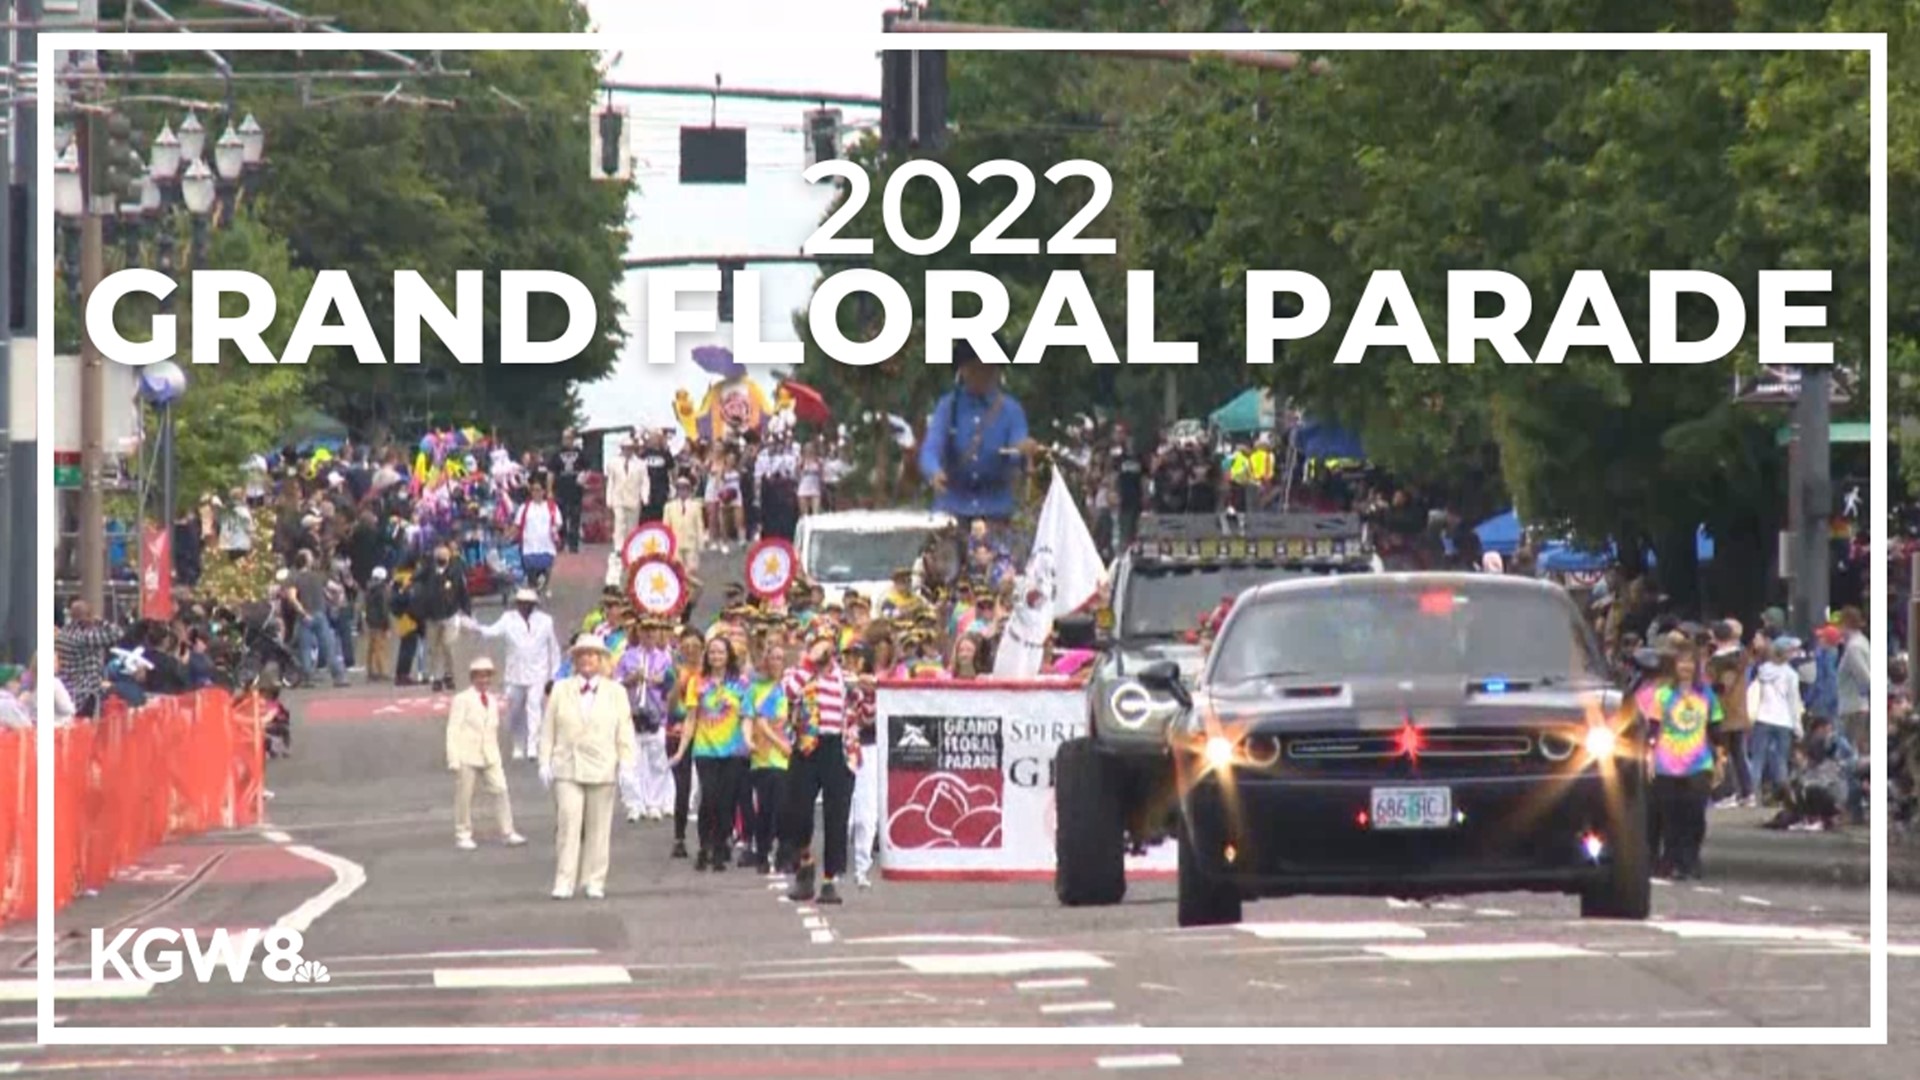 The Grand Floral Parade kicks off from the Veterans Memorial Coliseum in North Portland. The iconic Rose Festival event was canceled two years in a row due to COVID.